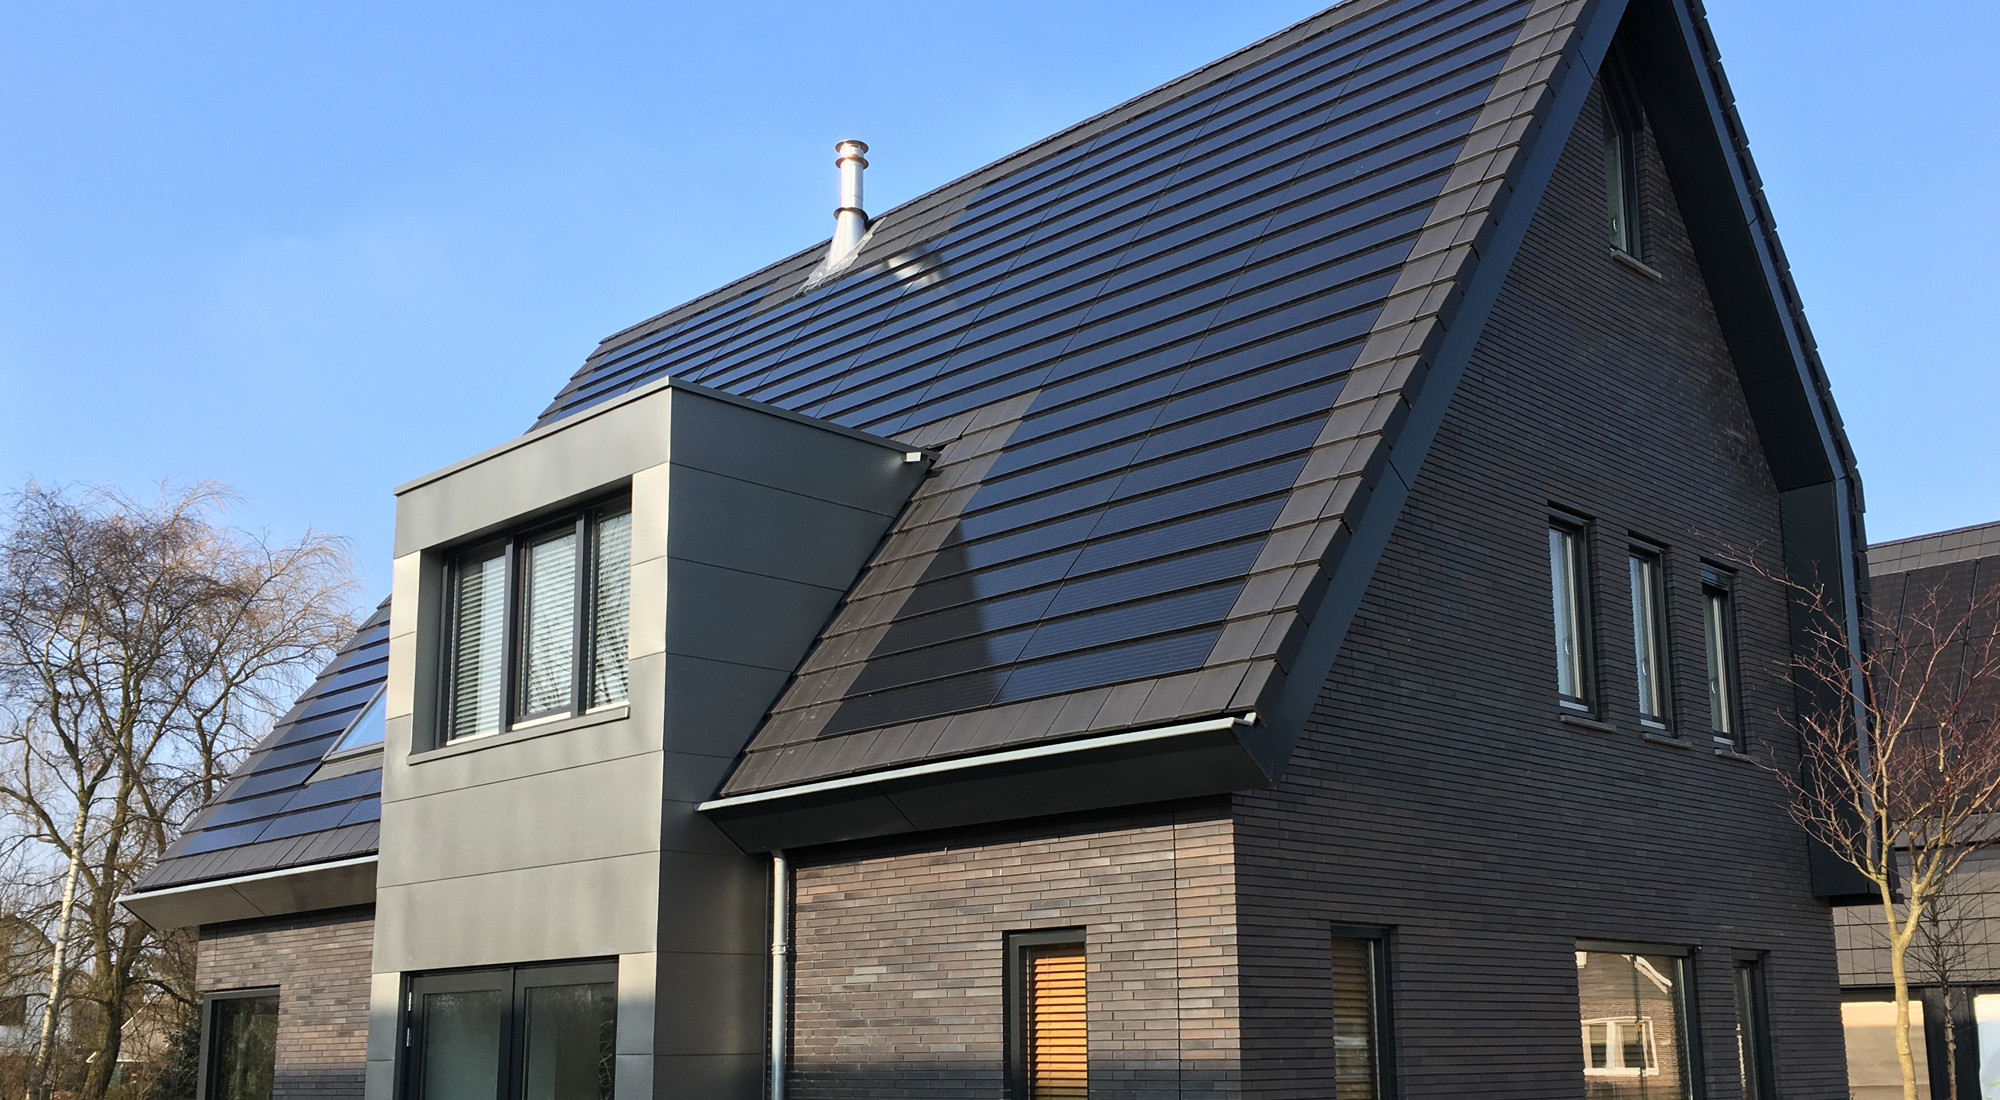 Planum Concrete Roof Tiles and Integrated Solar Systems